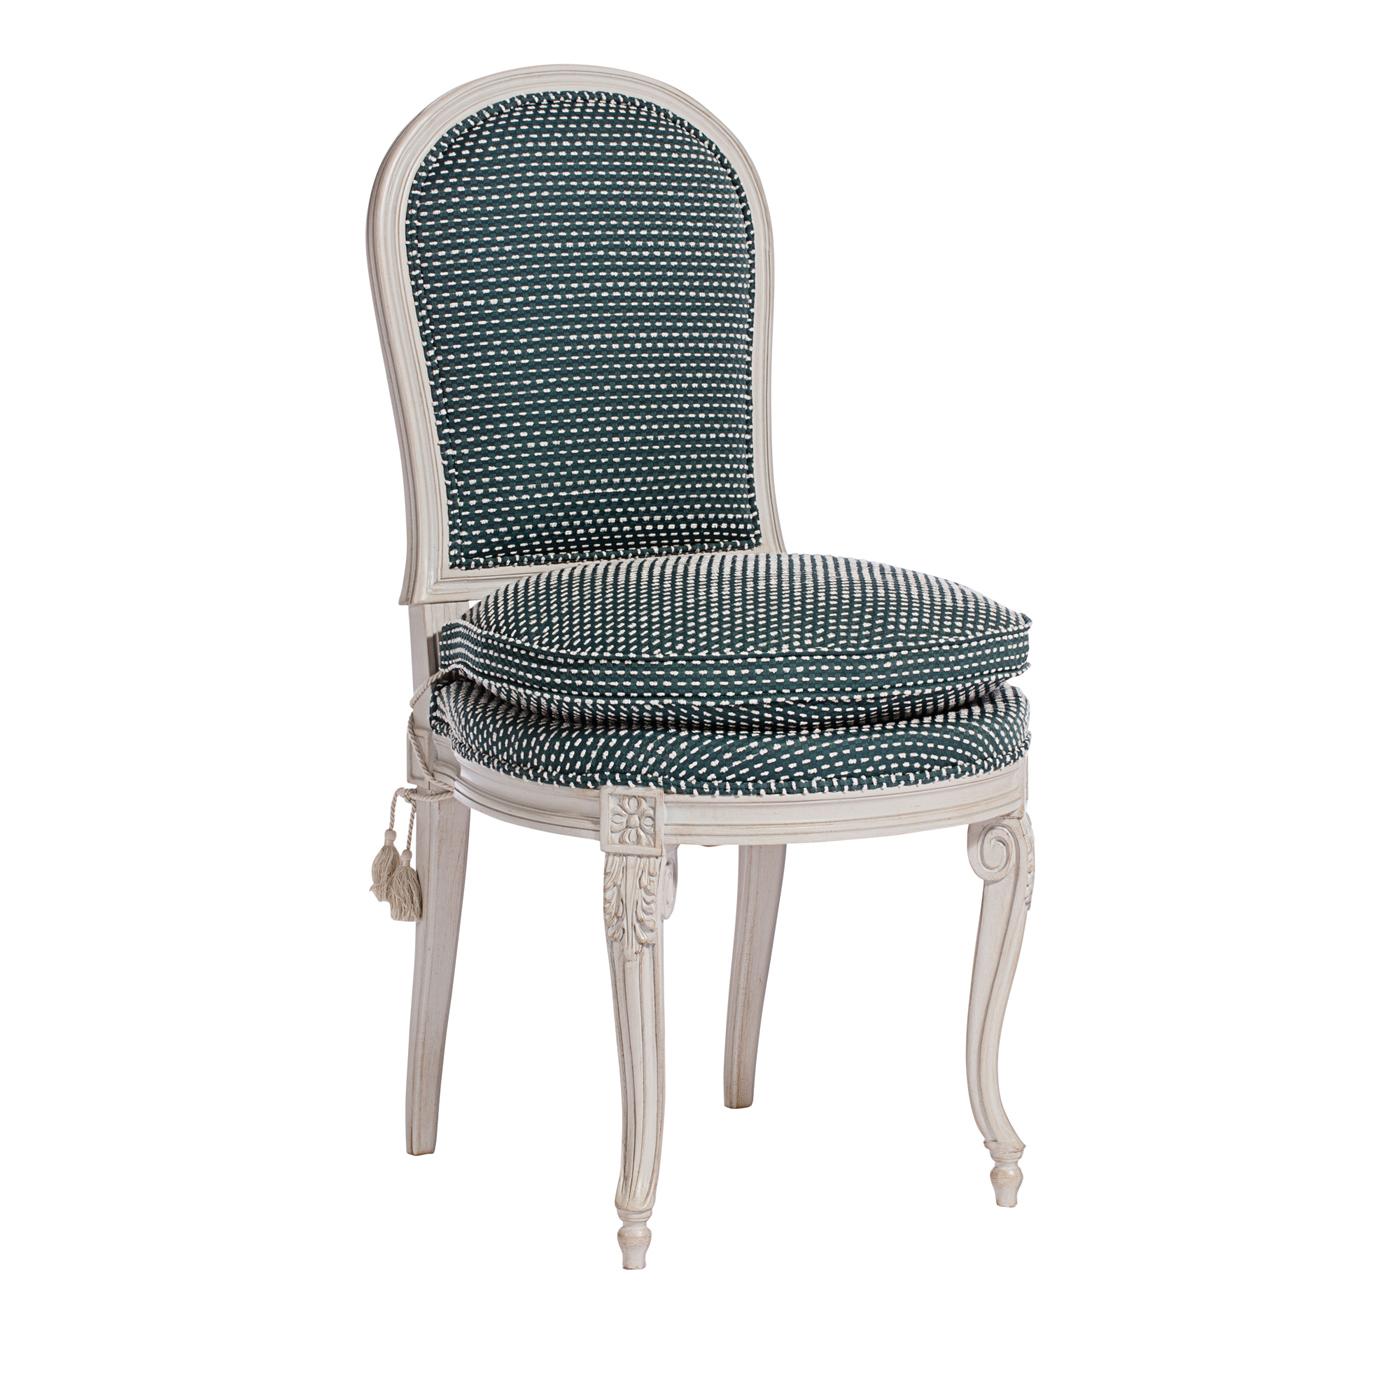 Available with back mechanical caned and seat upholstered with cushion.



